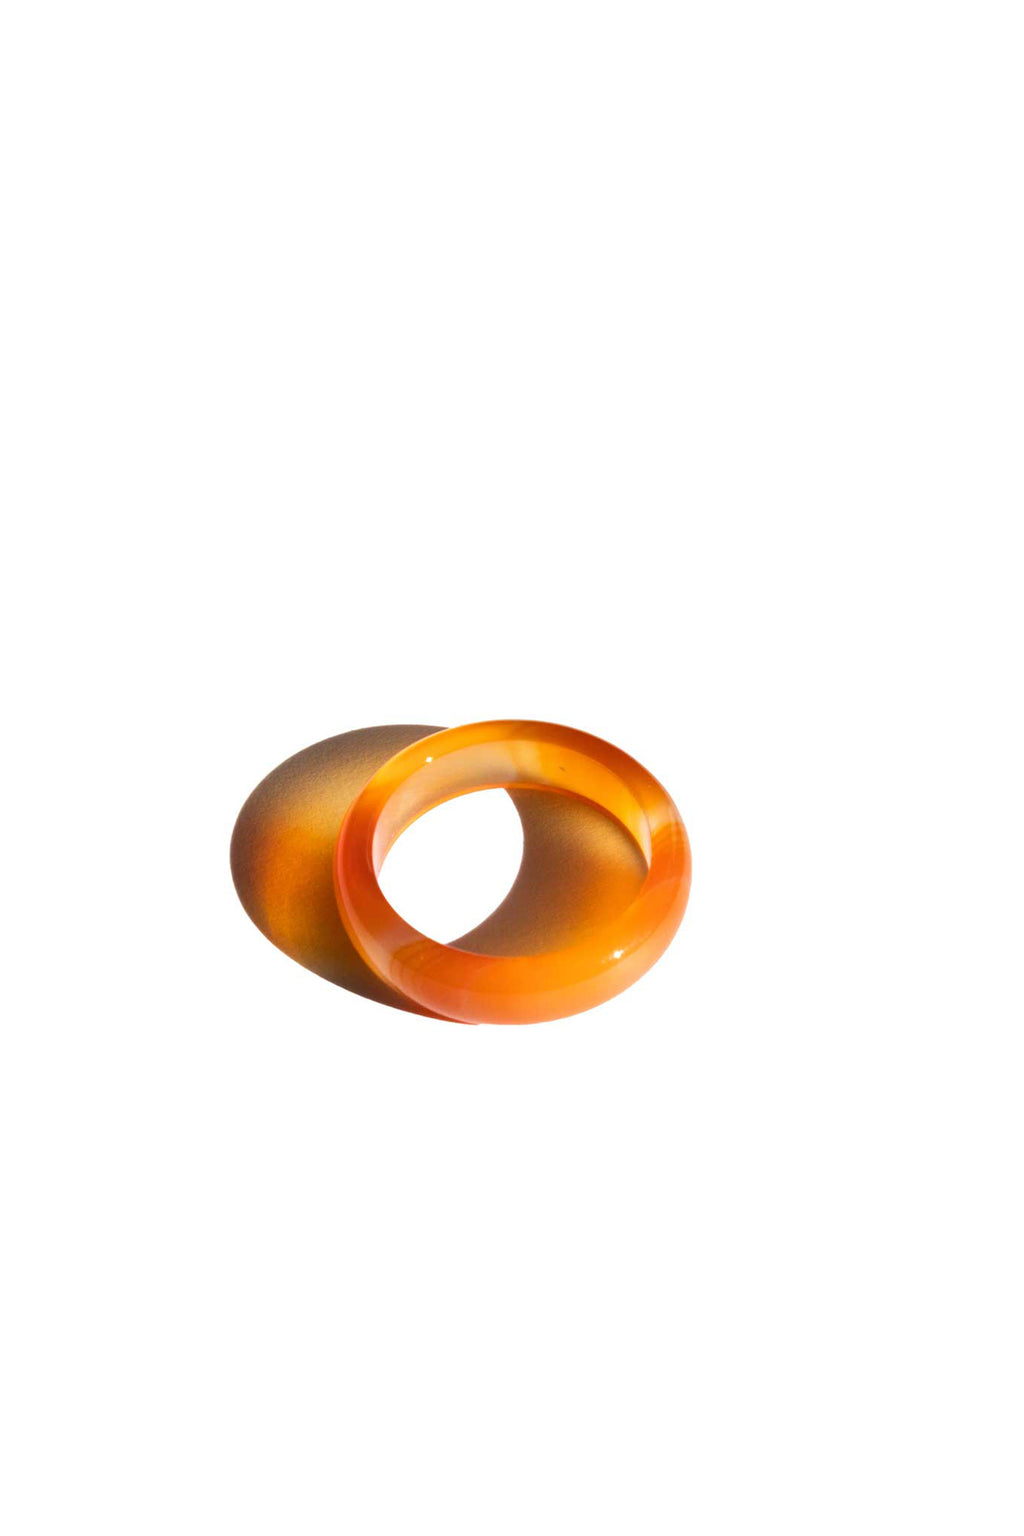 seree-Persimmon-ring-in-orange-color-and-agate